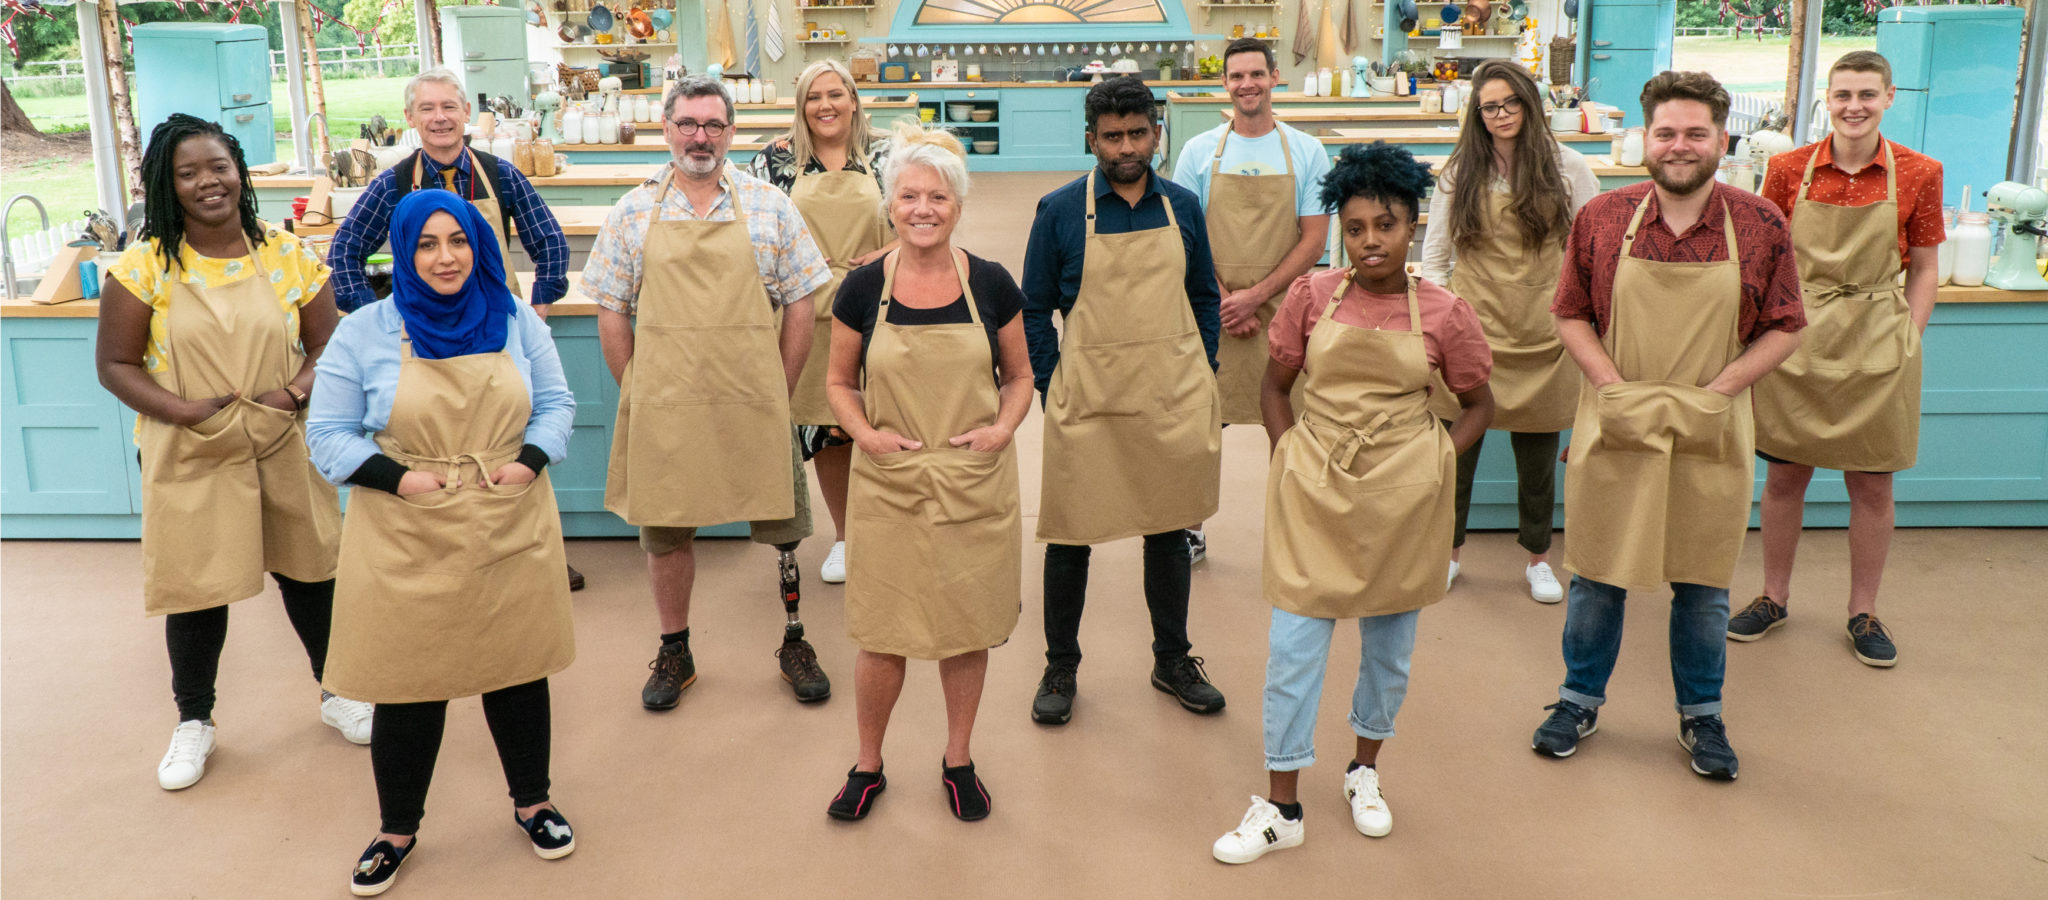 Series 6 The Great British Bake Off